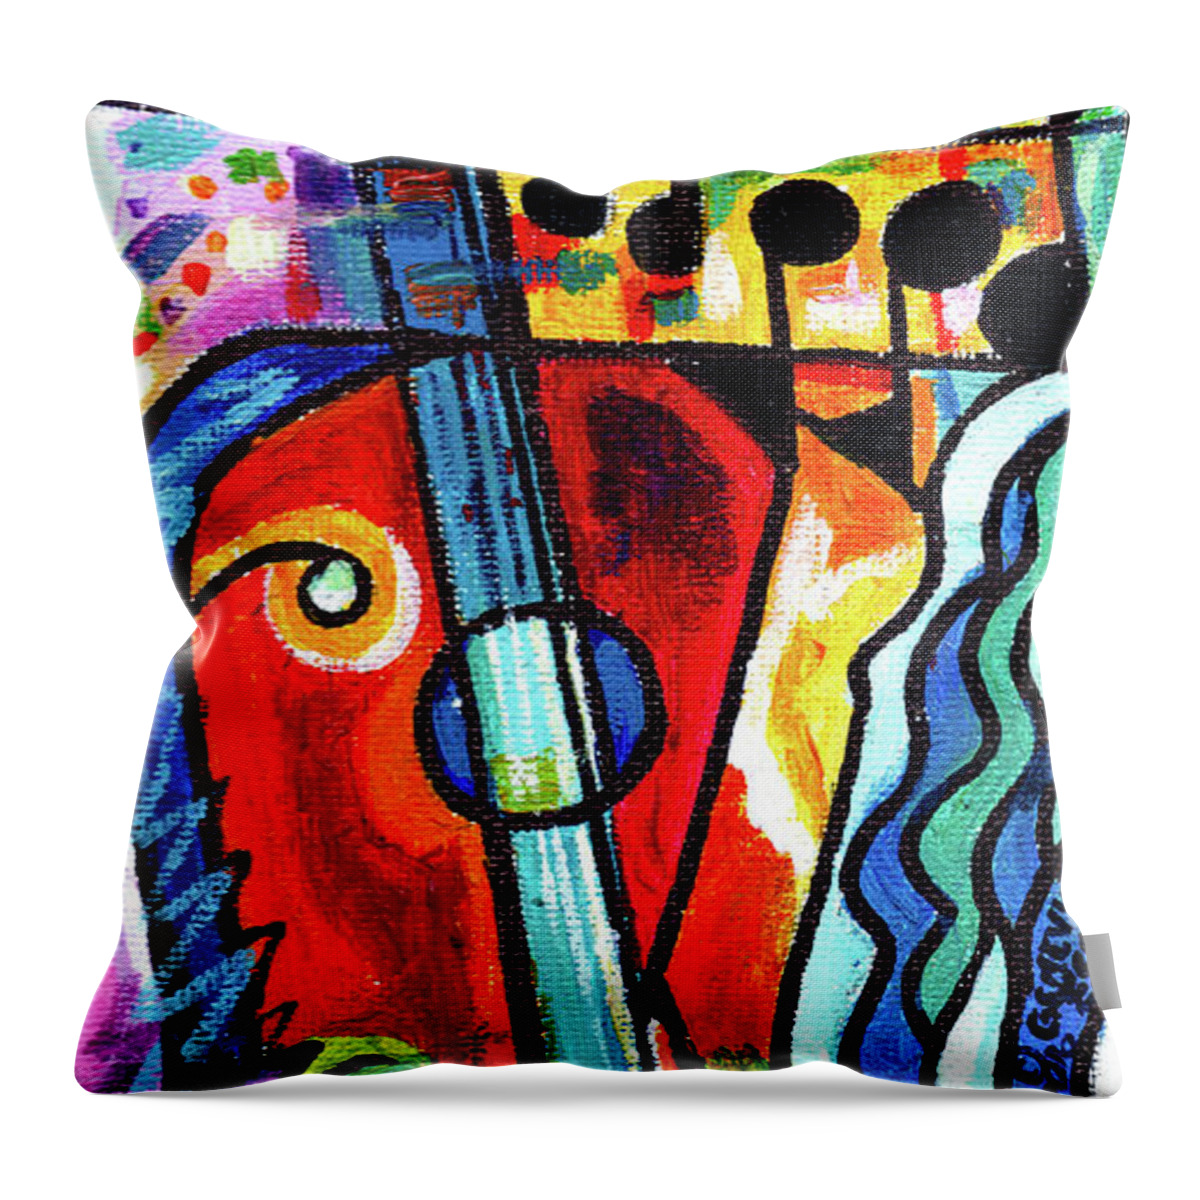 Whimsical Throw Pillow featuring the painting Creve Coeur Streetlight Banners Whimsical Motion 10 by Genevieve Esson